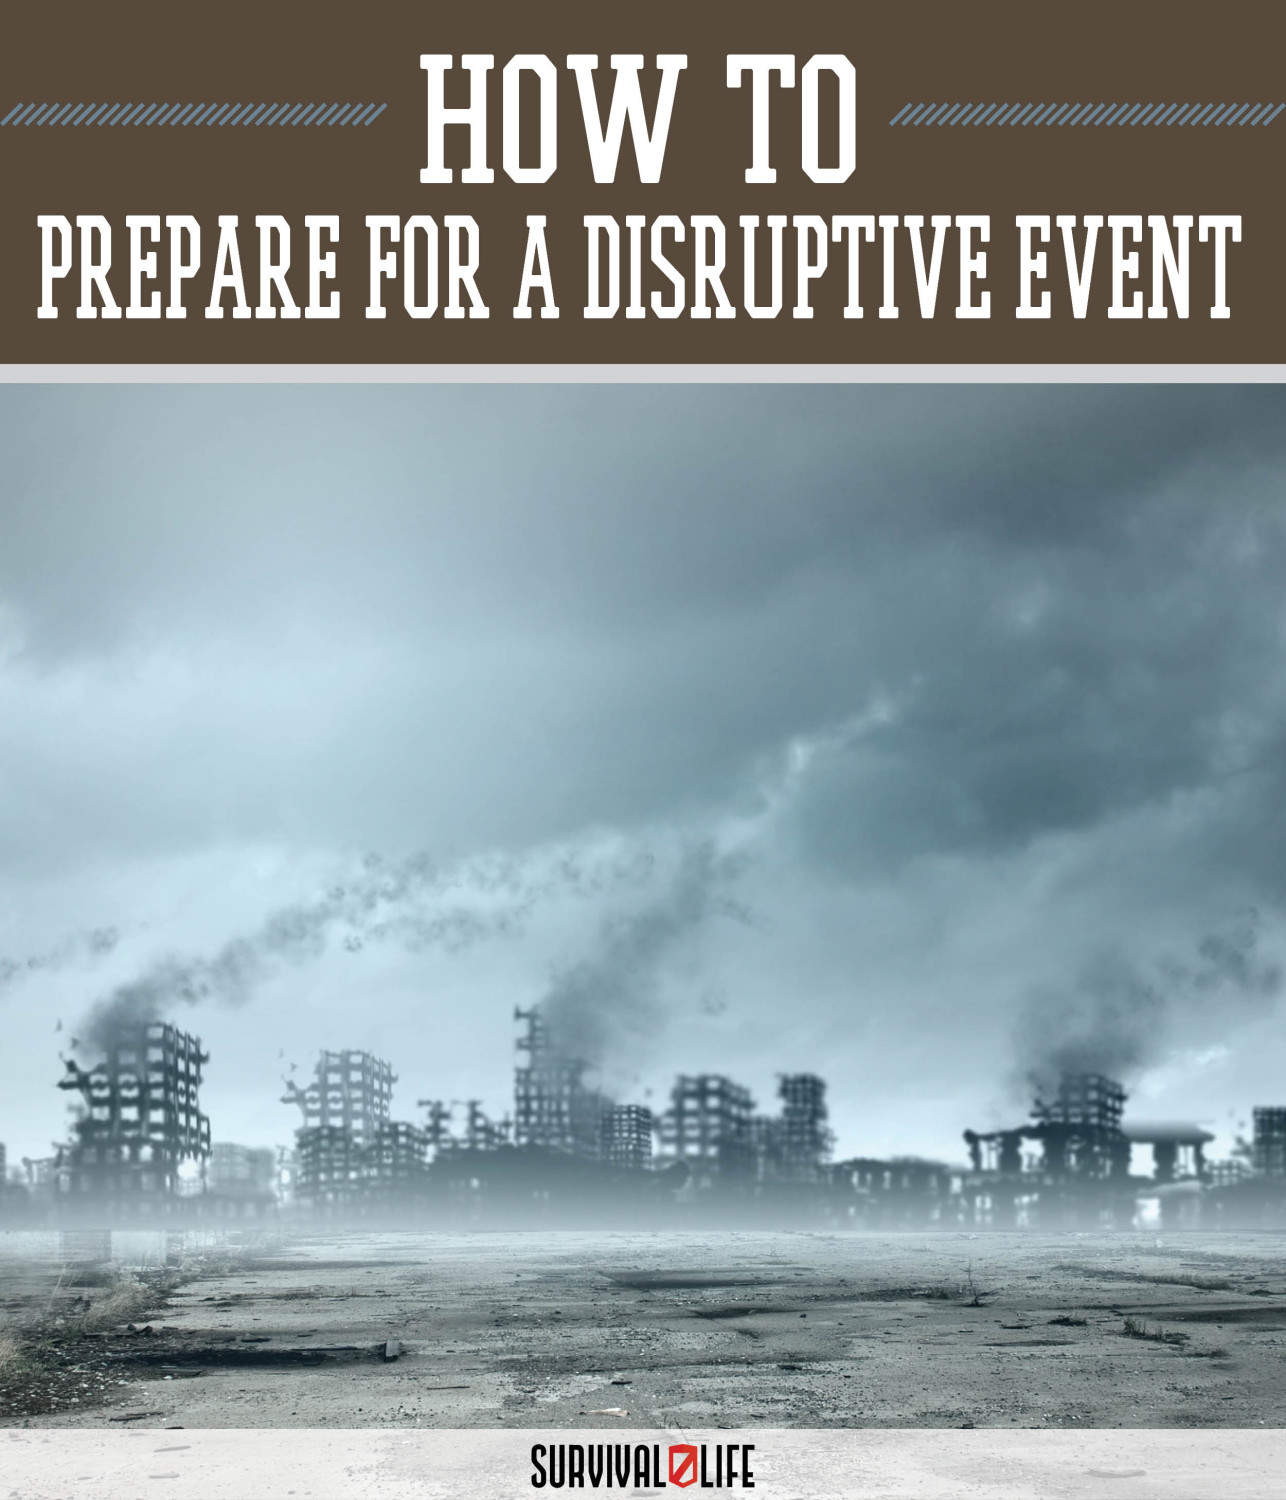 What is a Disruptive Event, and How Can You Prepare? by Survival Life at http://survivallife.staging.wpengine.com/2015/05/22/what-is-a-disruptive-event/